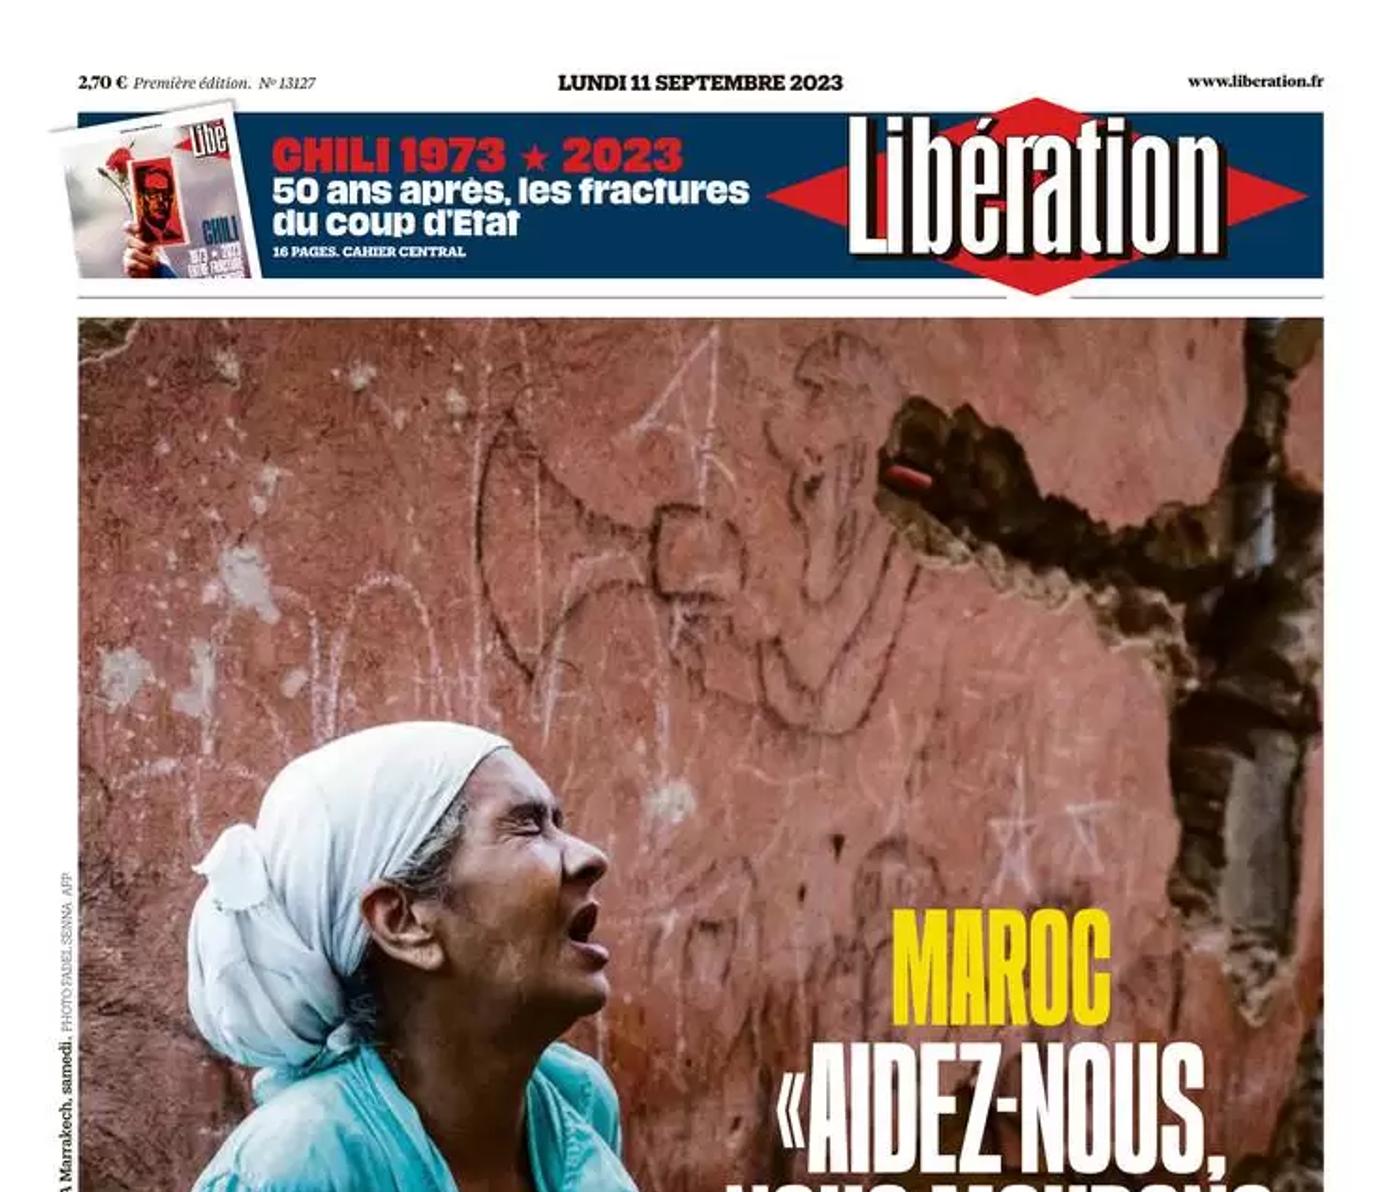 The front page of France's Libération, Sept. 11, 2023